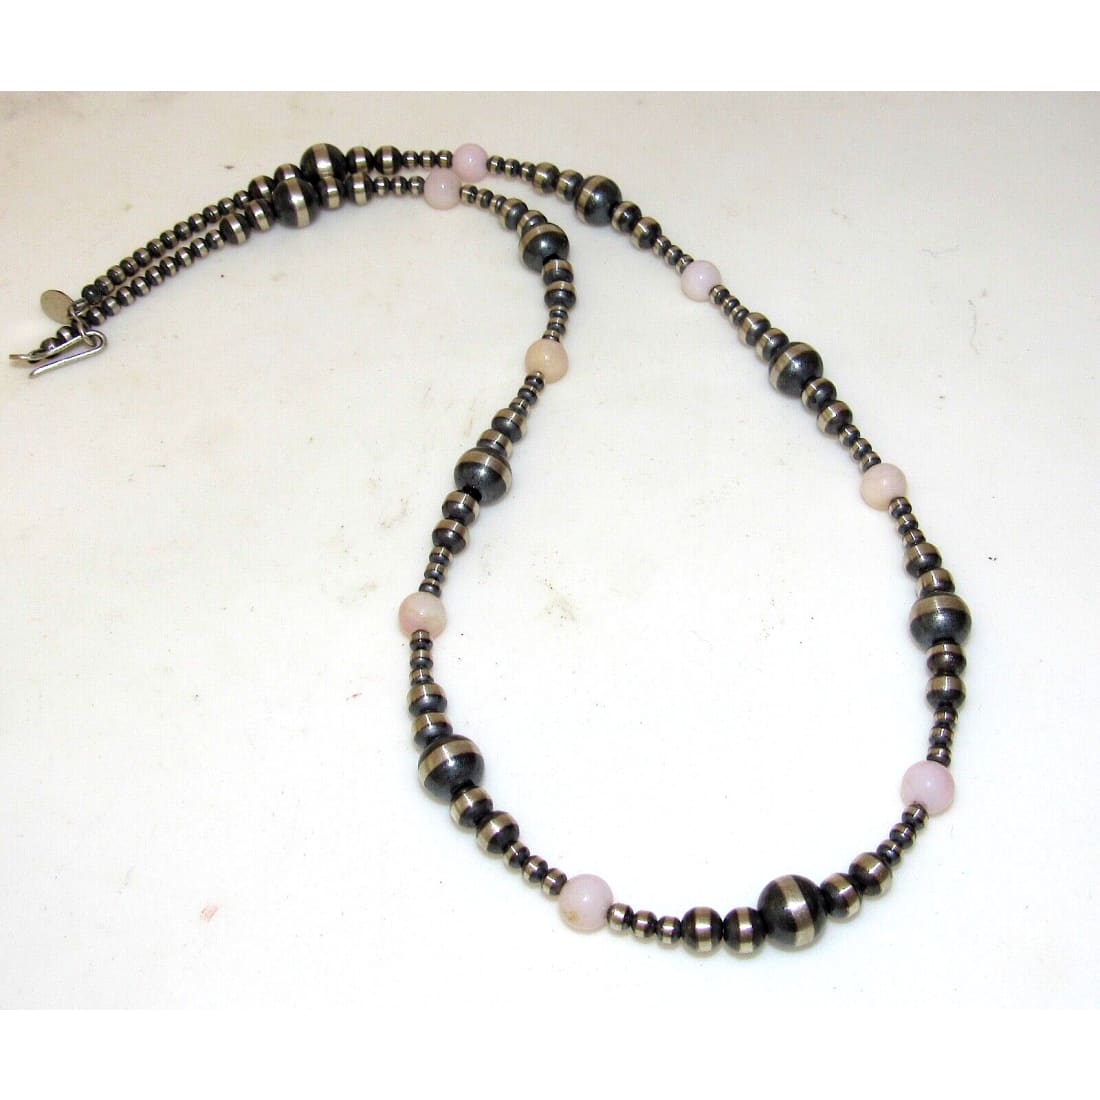 Navajo Pearls Necklace Sterling Silver Pink Conch Shell